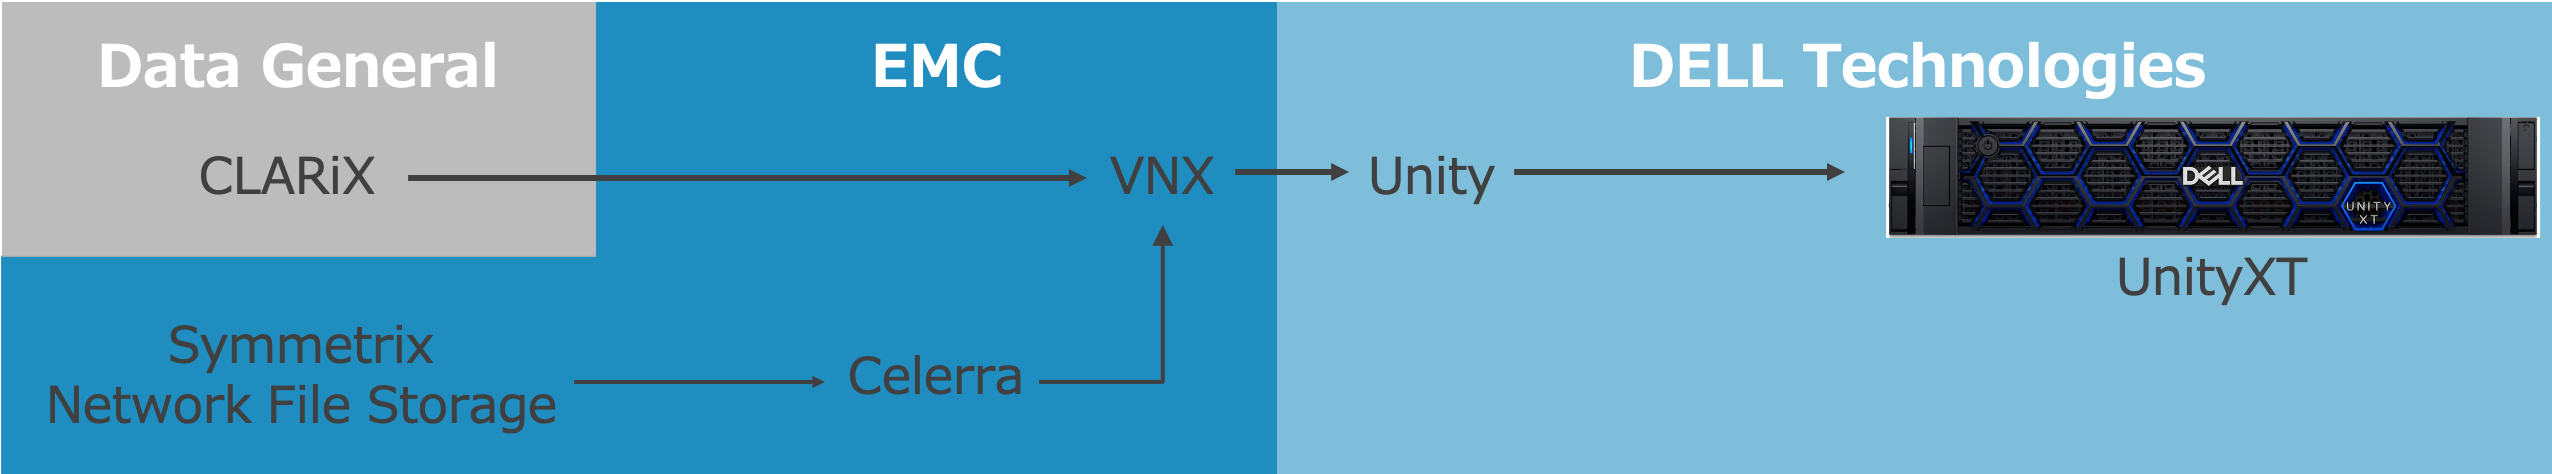 unityxt.png